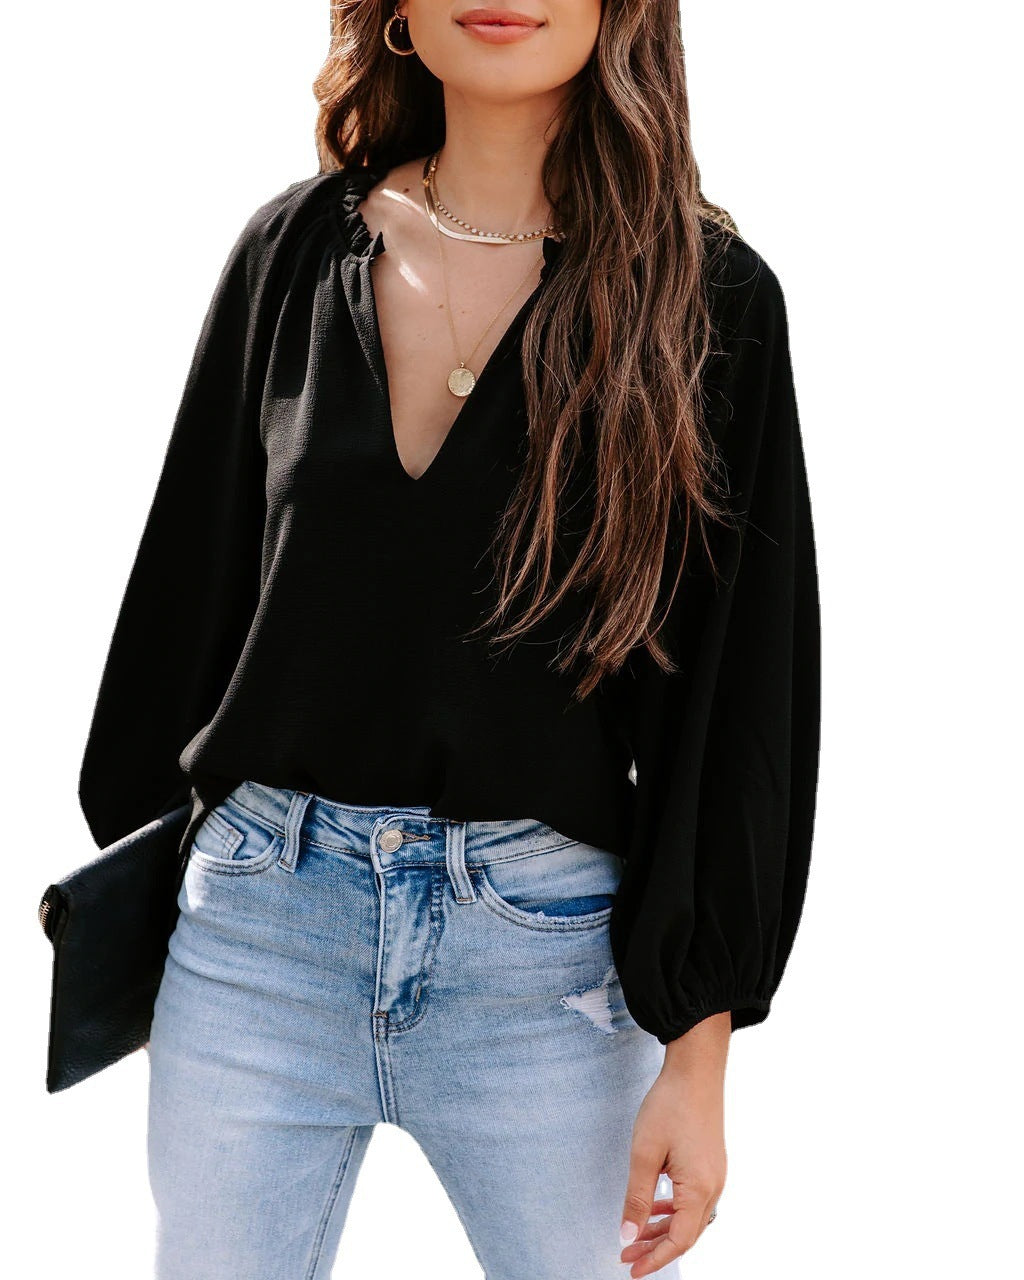 Women's Cool Long-sleeved Shirt Solid Color Comfortable Casual V-neck Loose Top